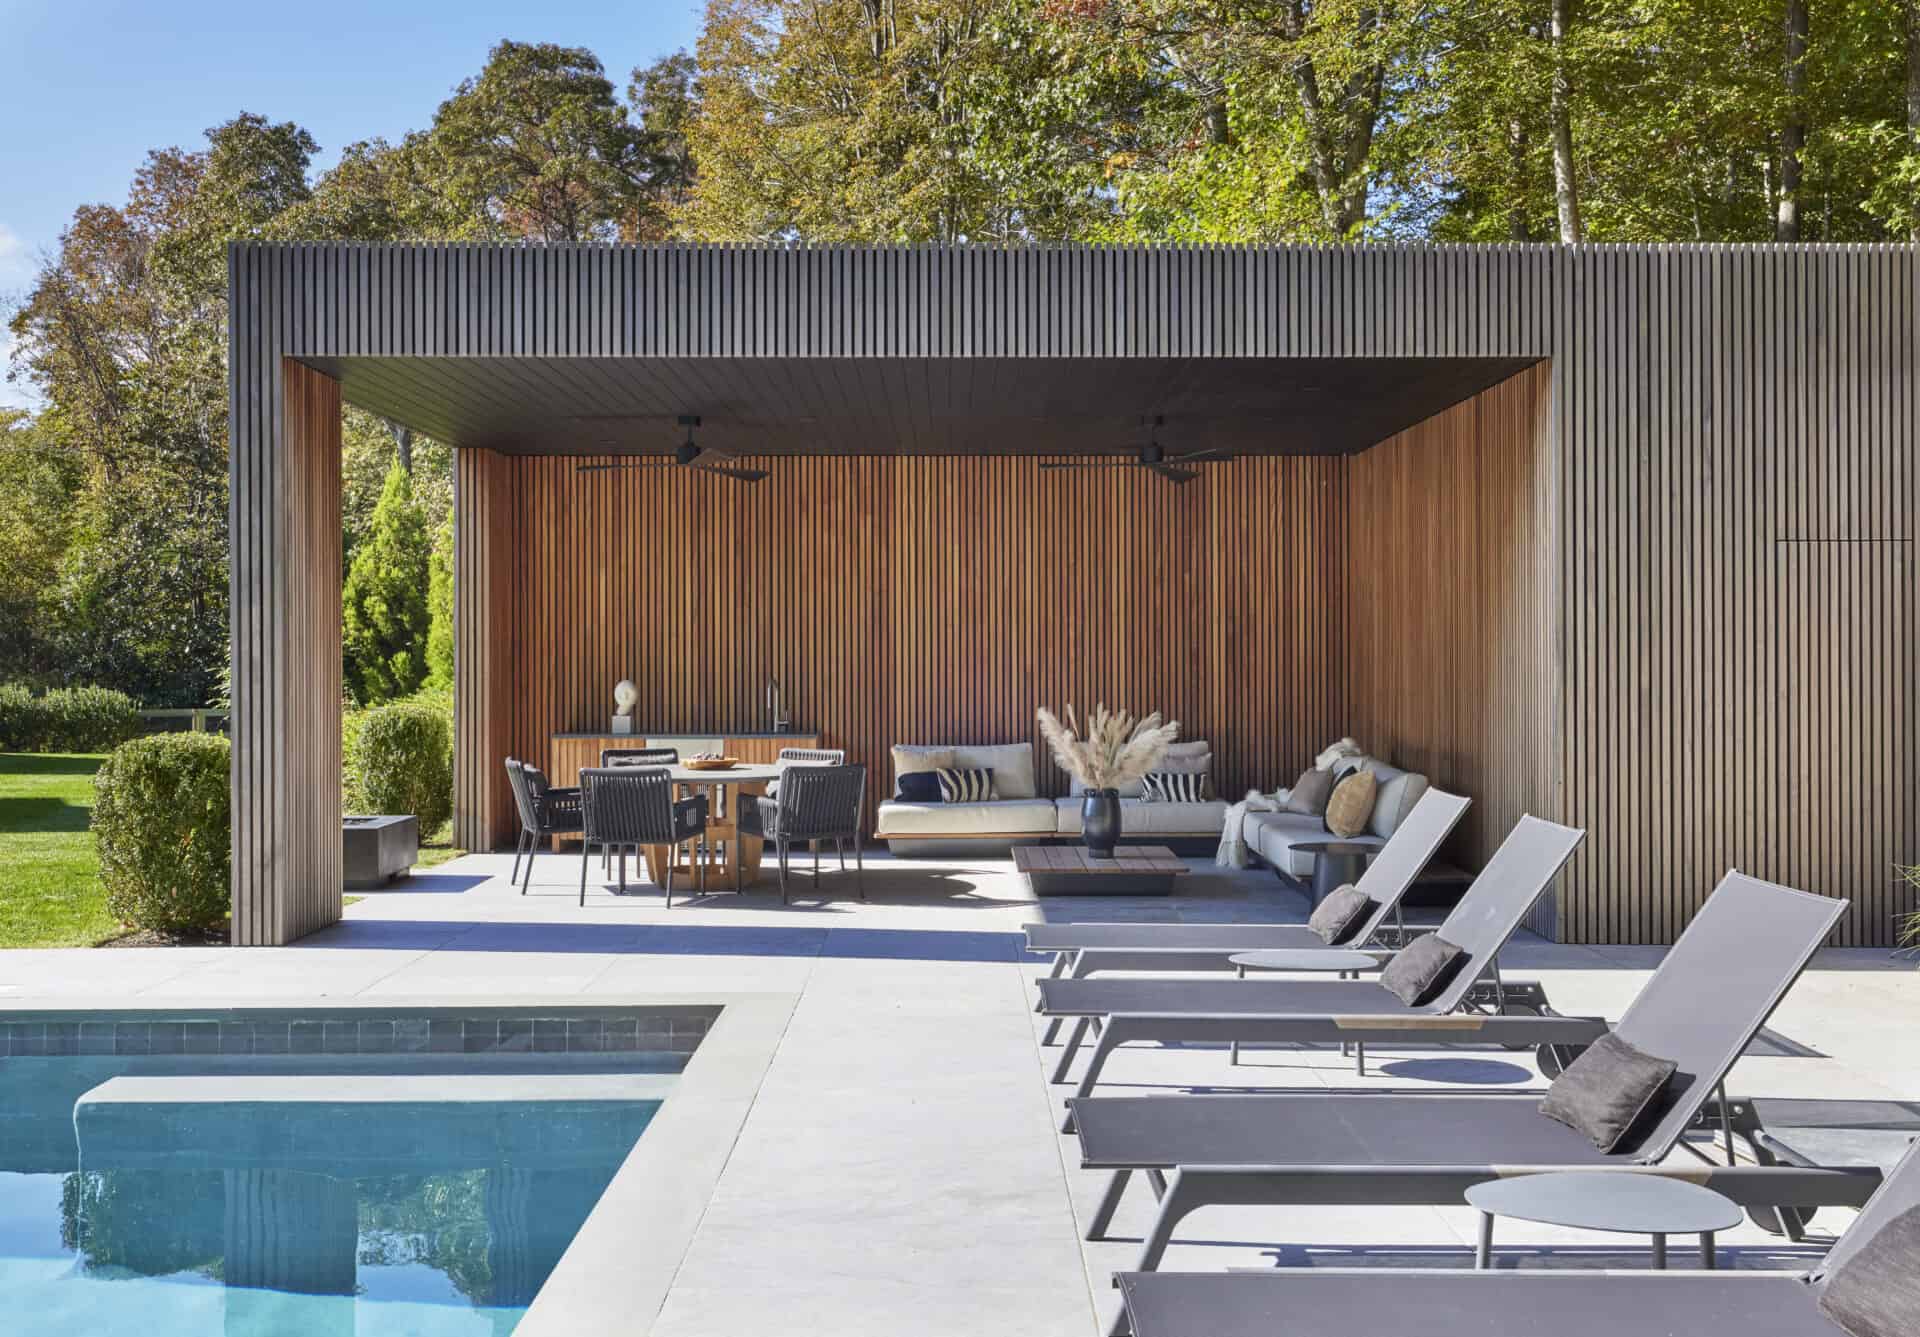 Outdoor lounge area with in-ground pool, lounge chairs, and covered outdoor patio